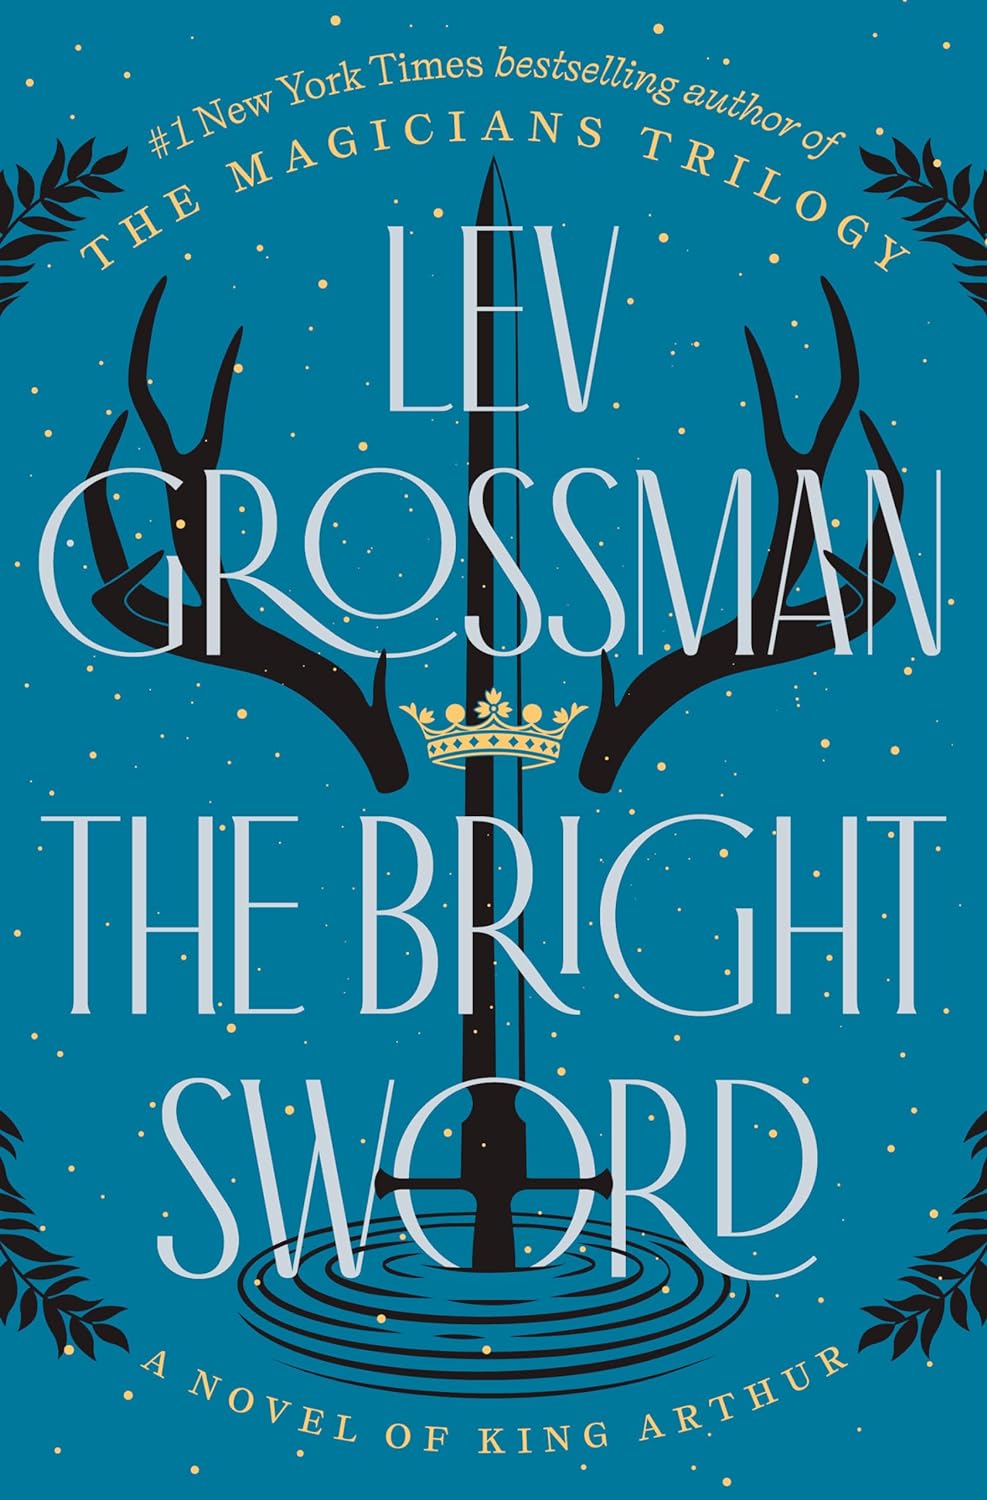 Image for "The Bright Sword"